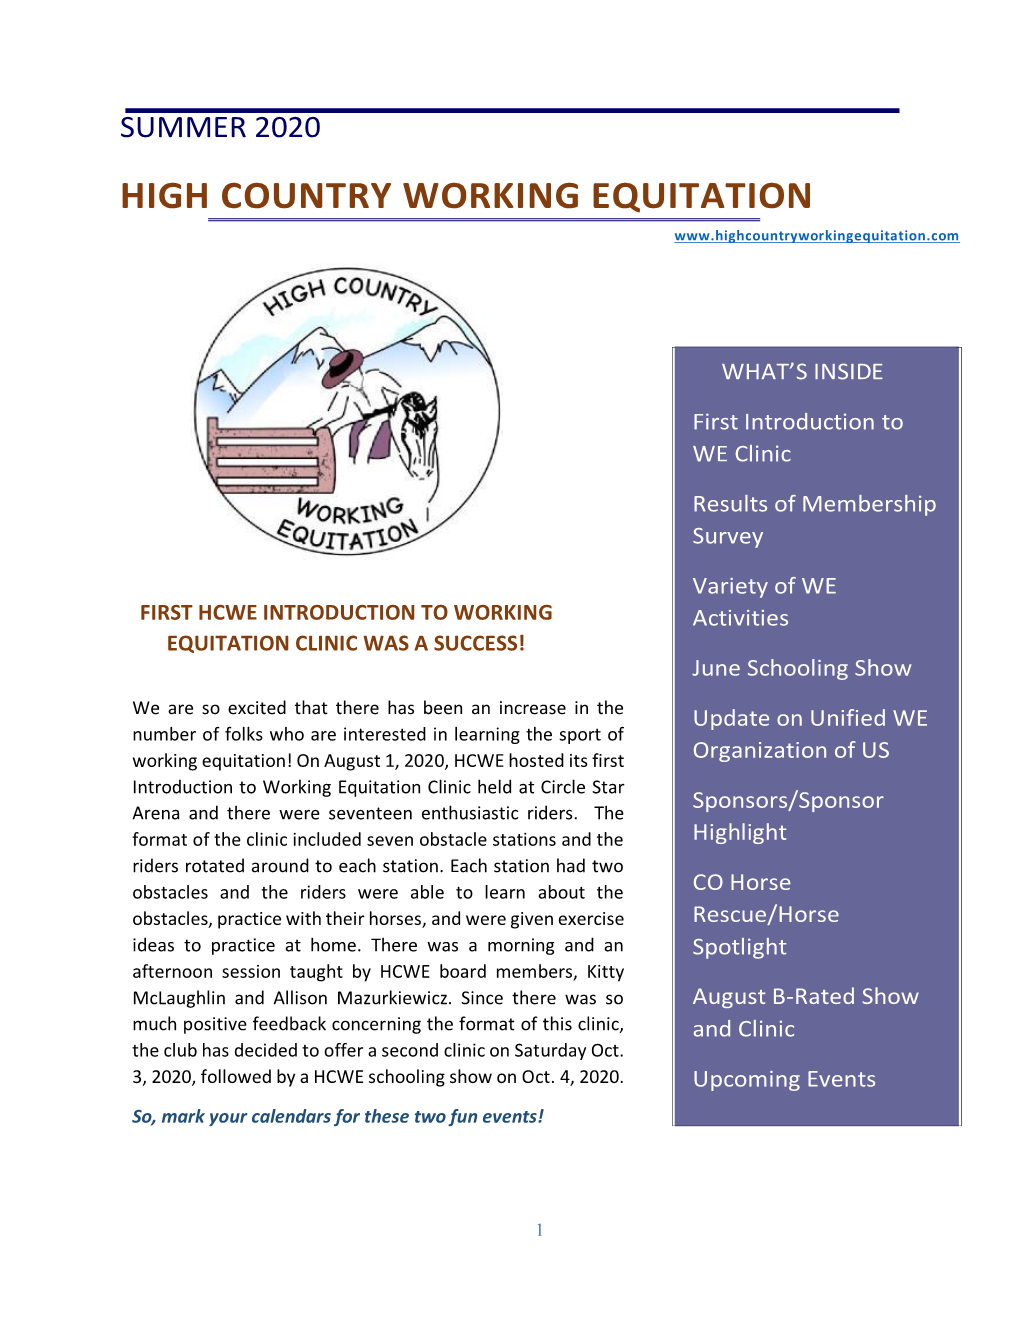 High Country Working Equitation